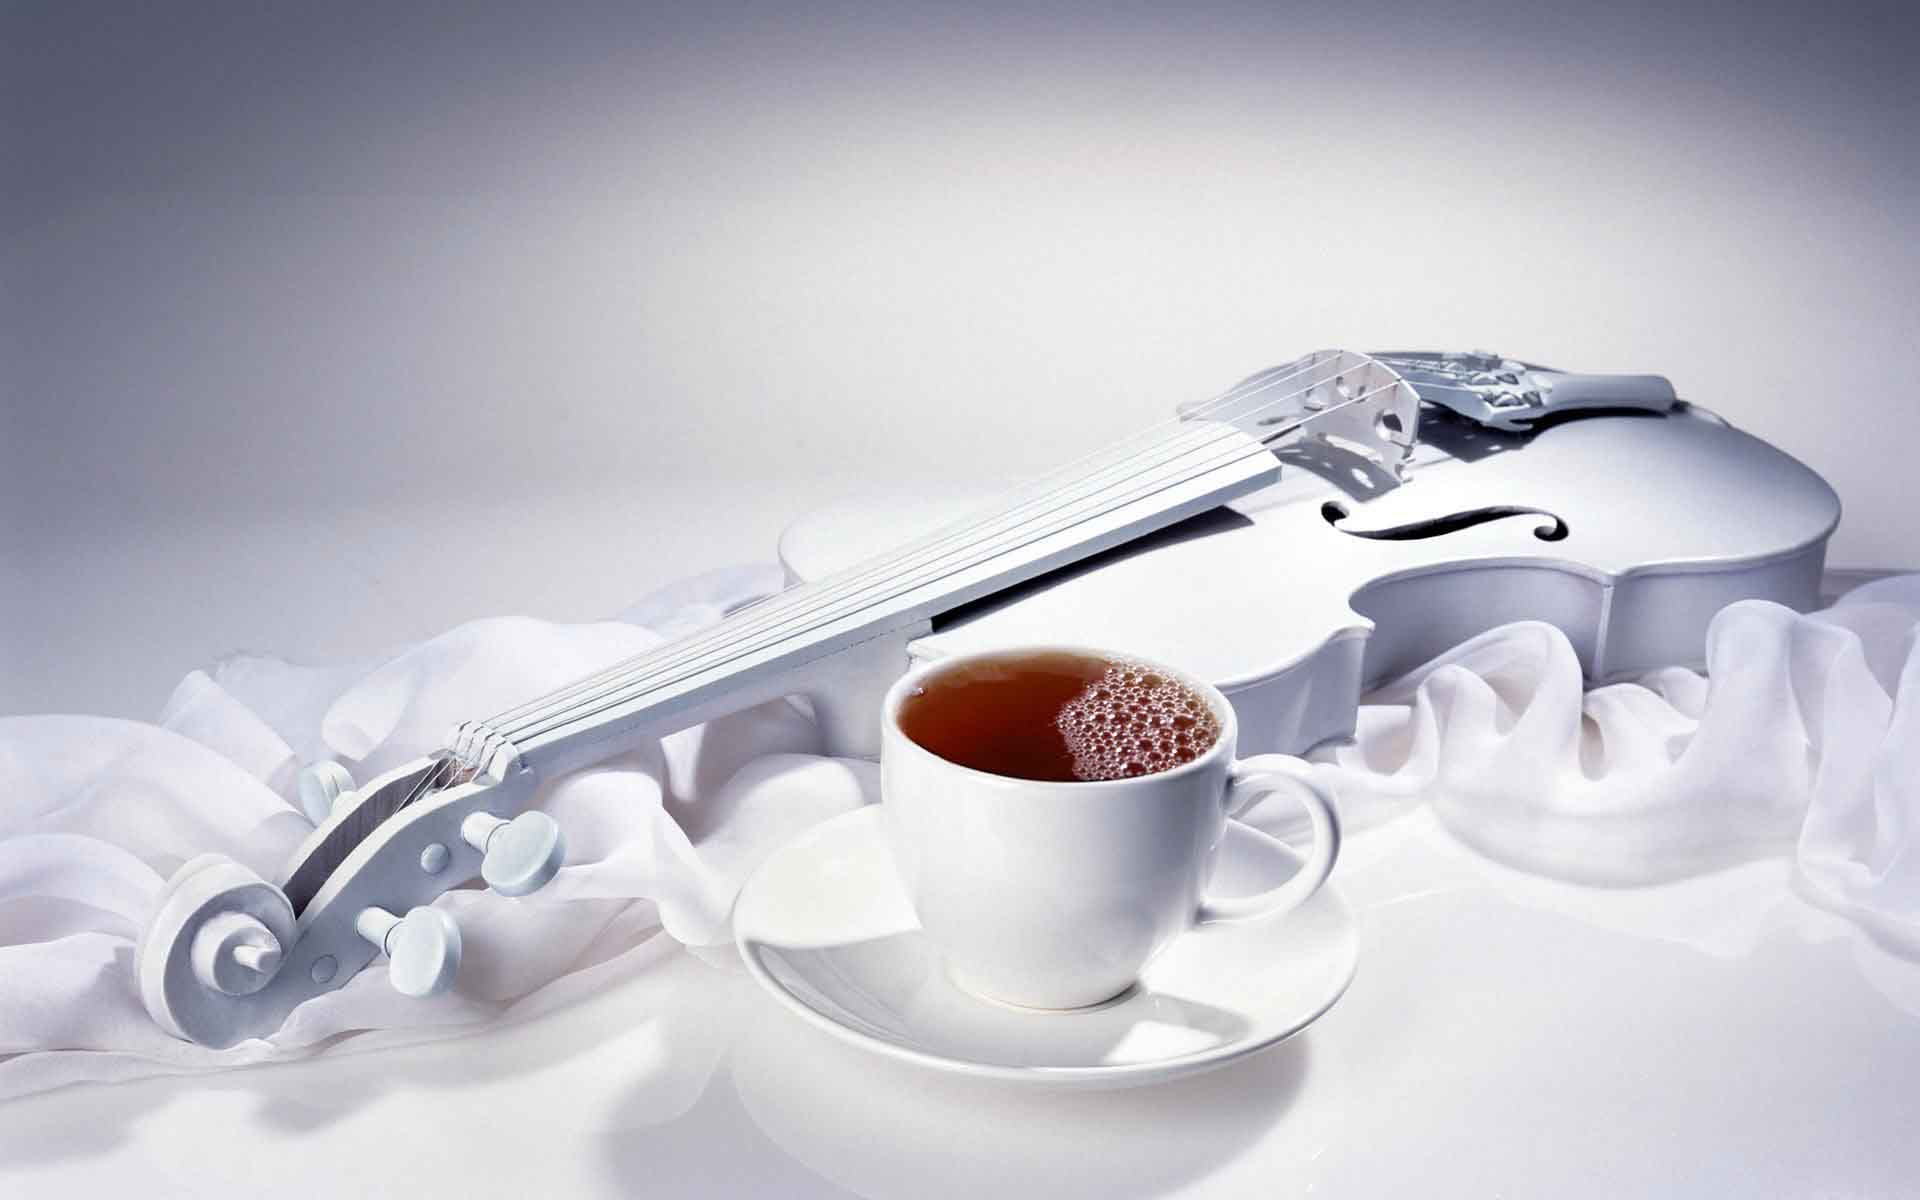 Latest Violin Hd New Wallpapers Free Download New HD Wallpapers